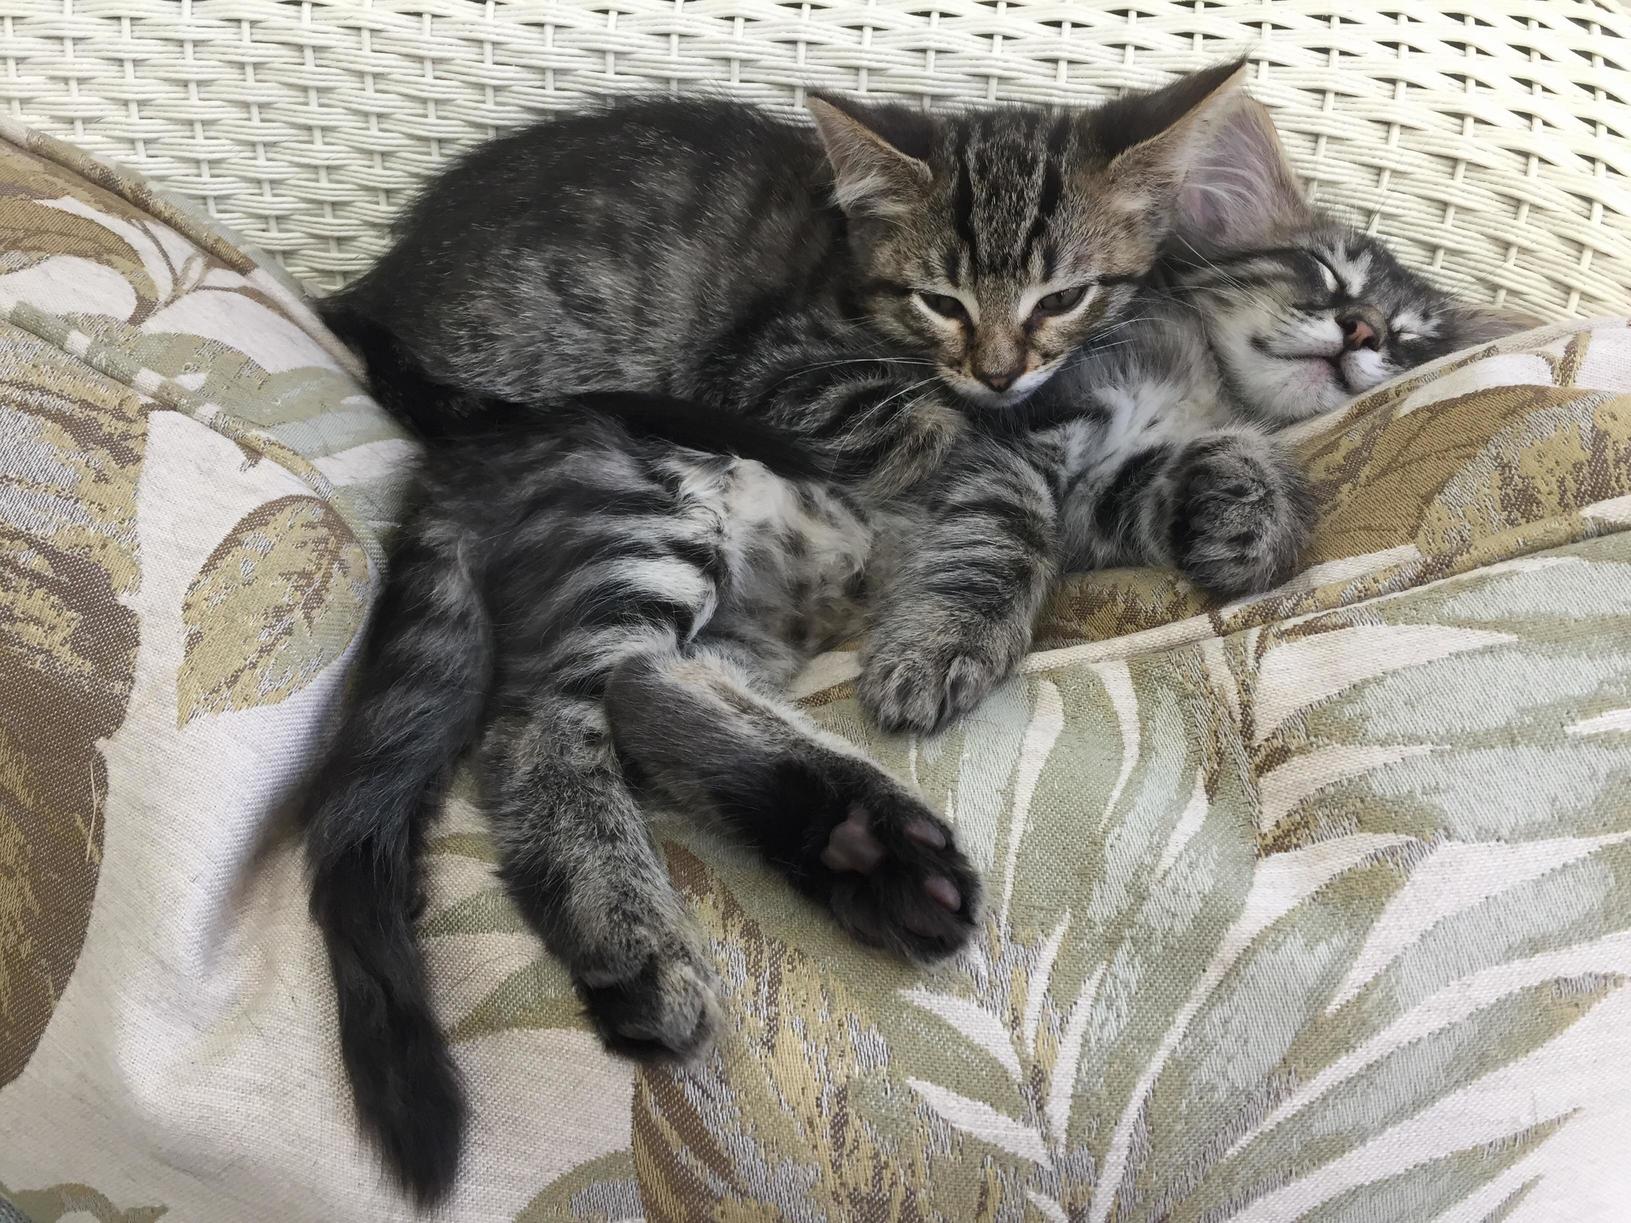 Foster kittens love to snuggle